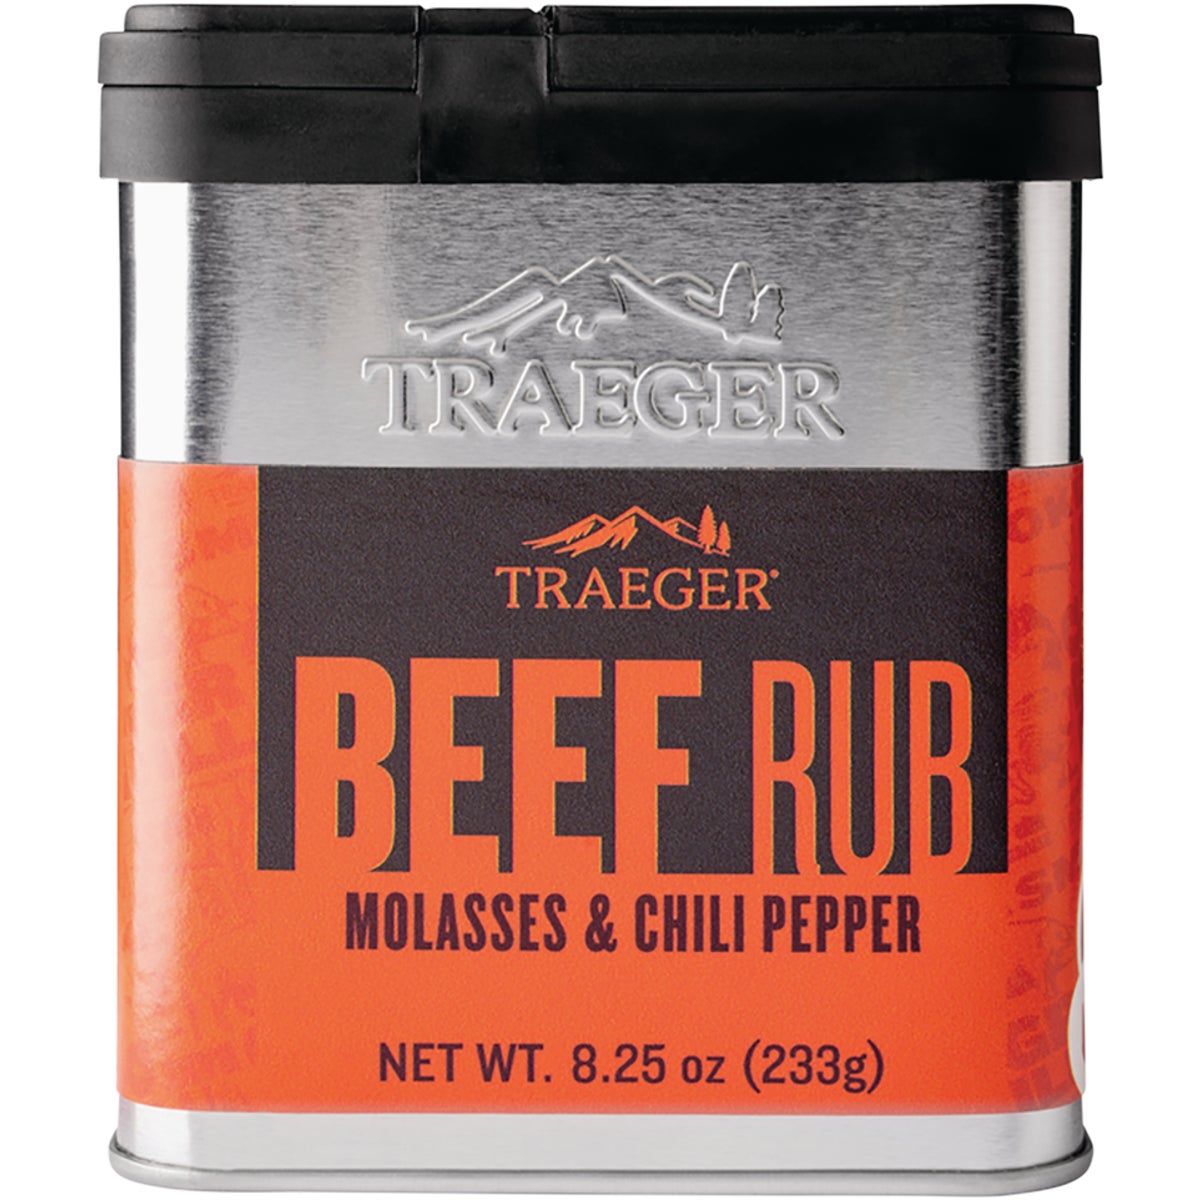 Item 801984, Shake or rub on all types of meat, poultry, fish, and vegetables to enhance